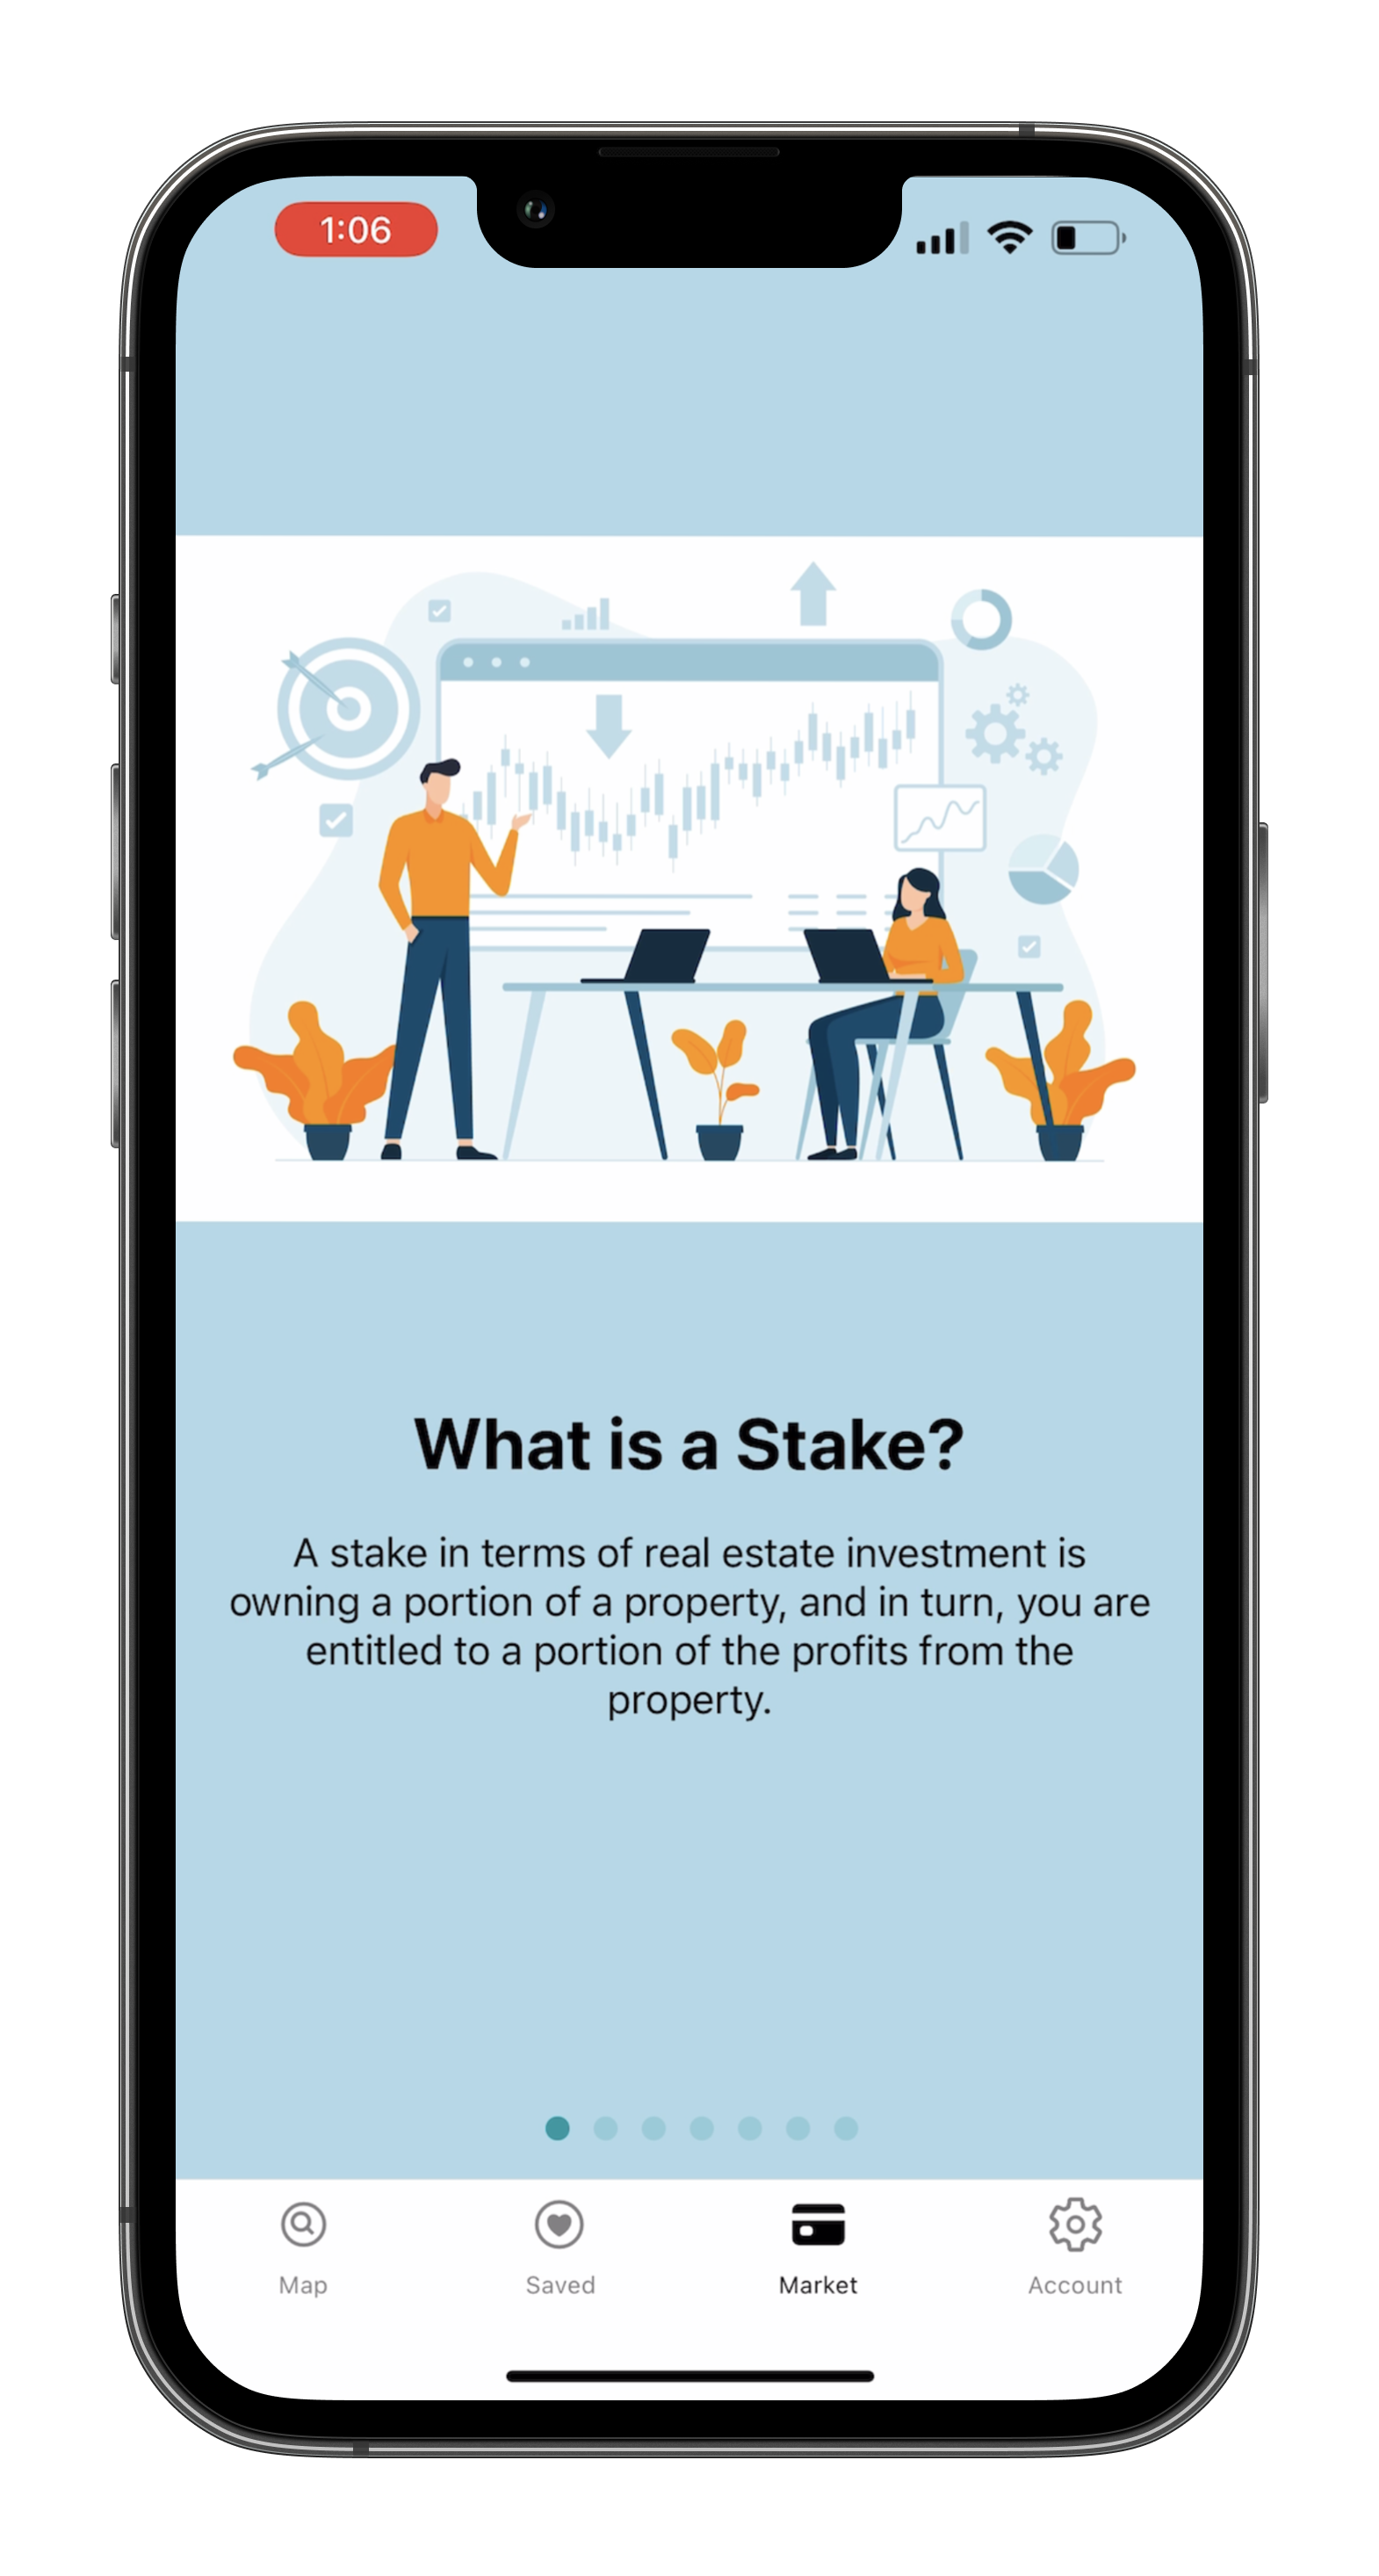 What is a stake?